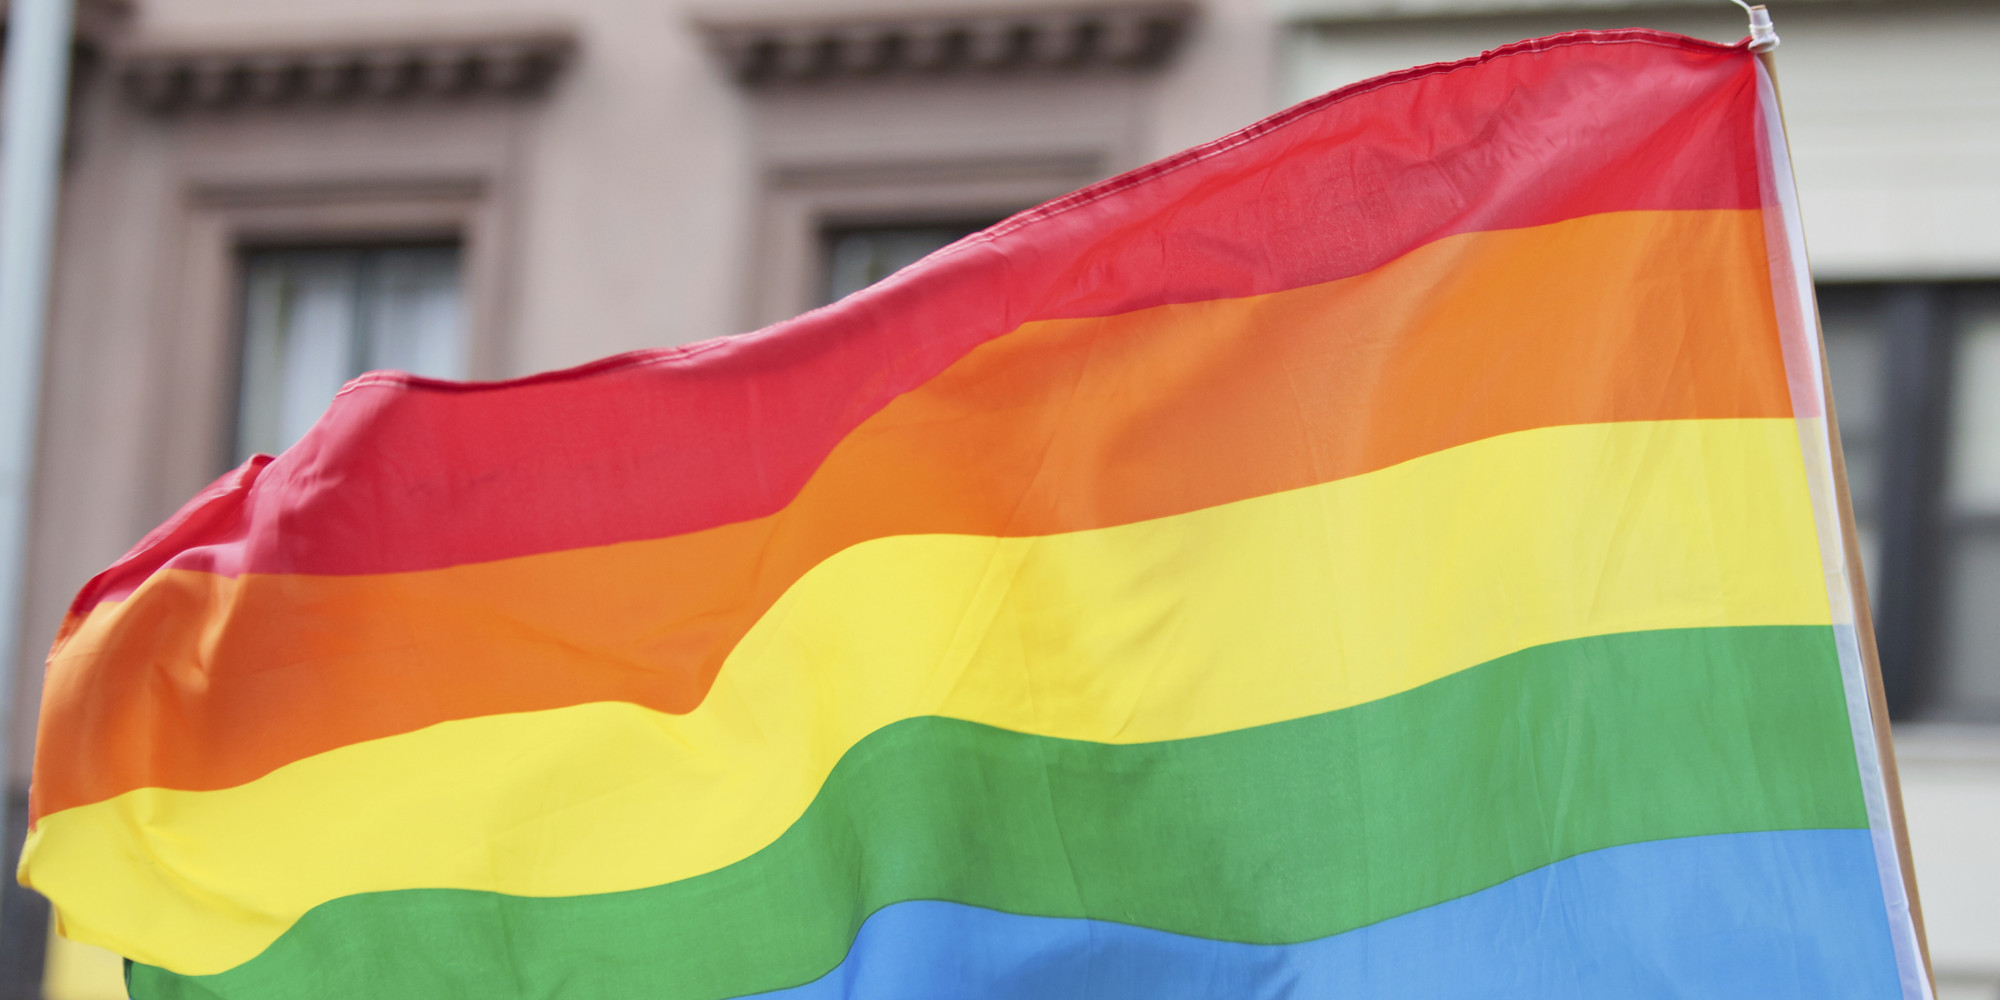 This 5-Person Town Just Made A Big Statement About LGBT Equality | HuffPost